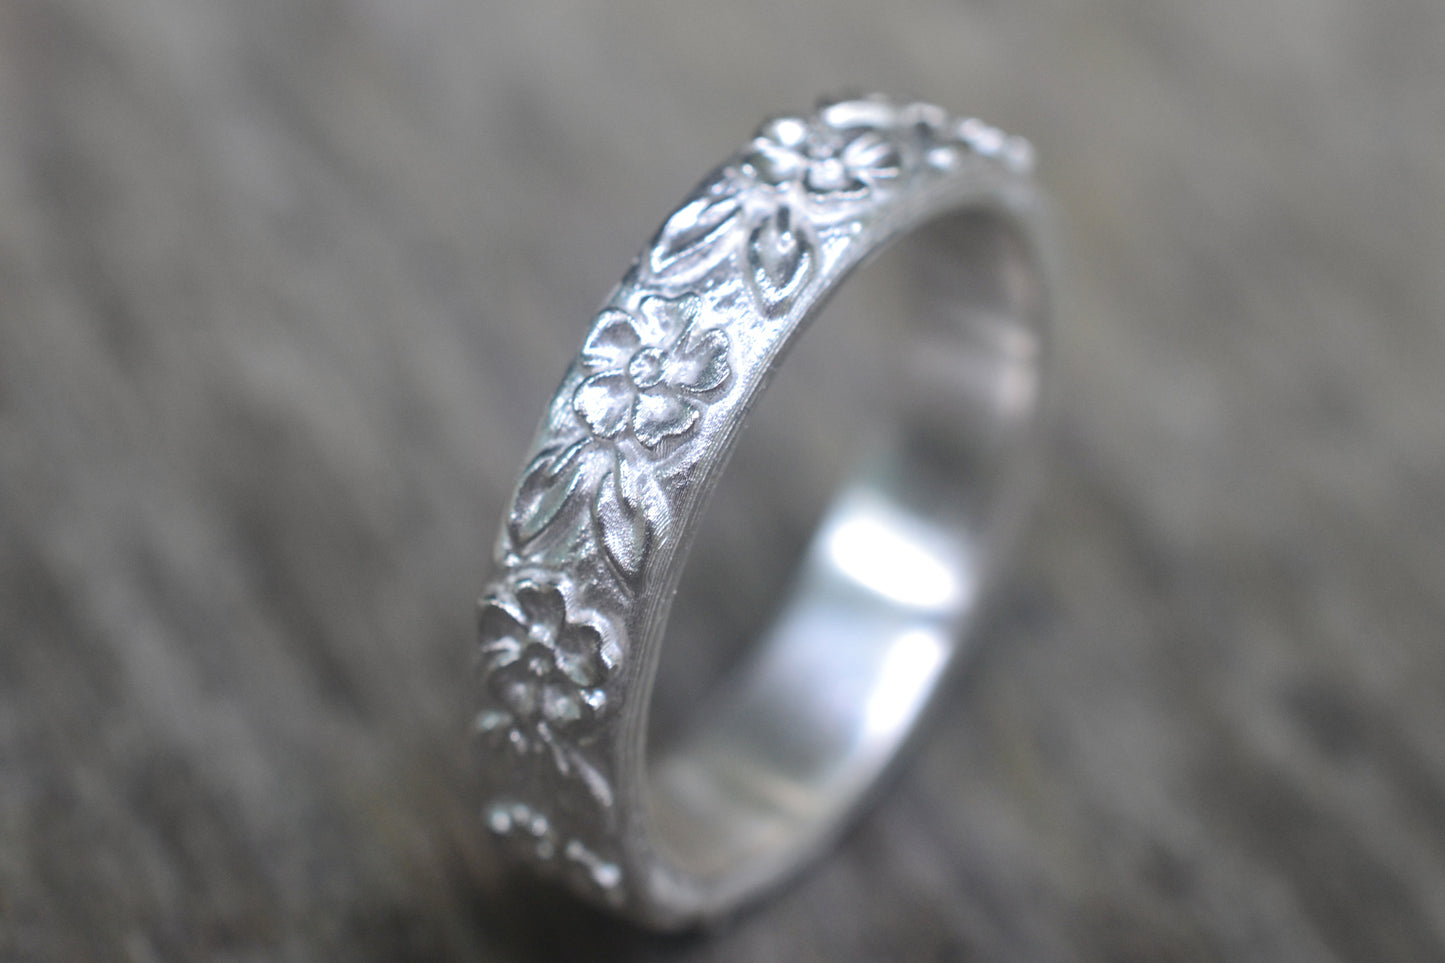 Recycled Silver Wedding Band With Floral Design